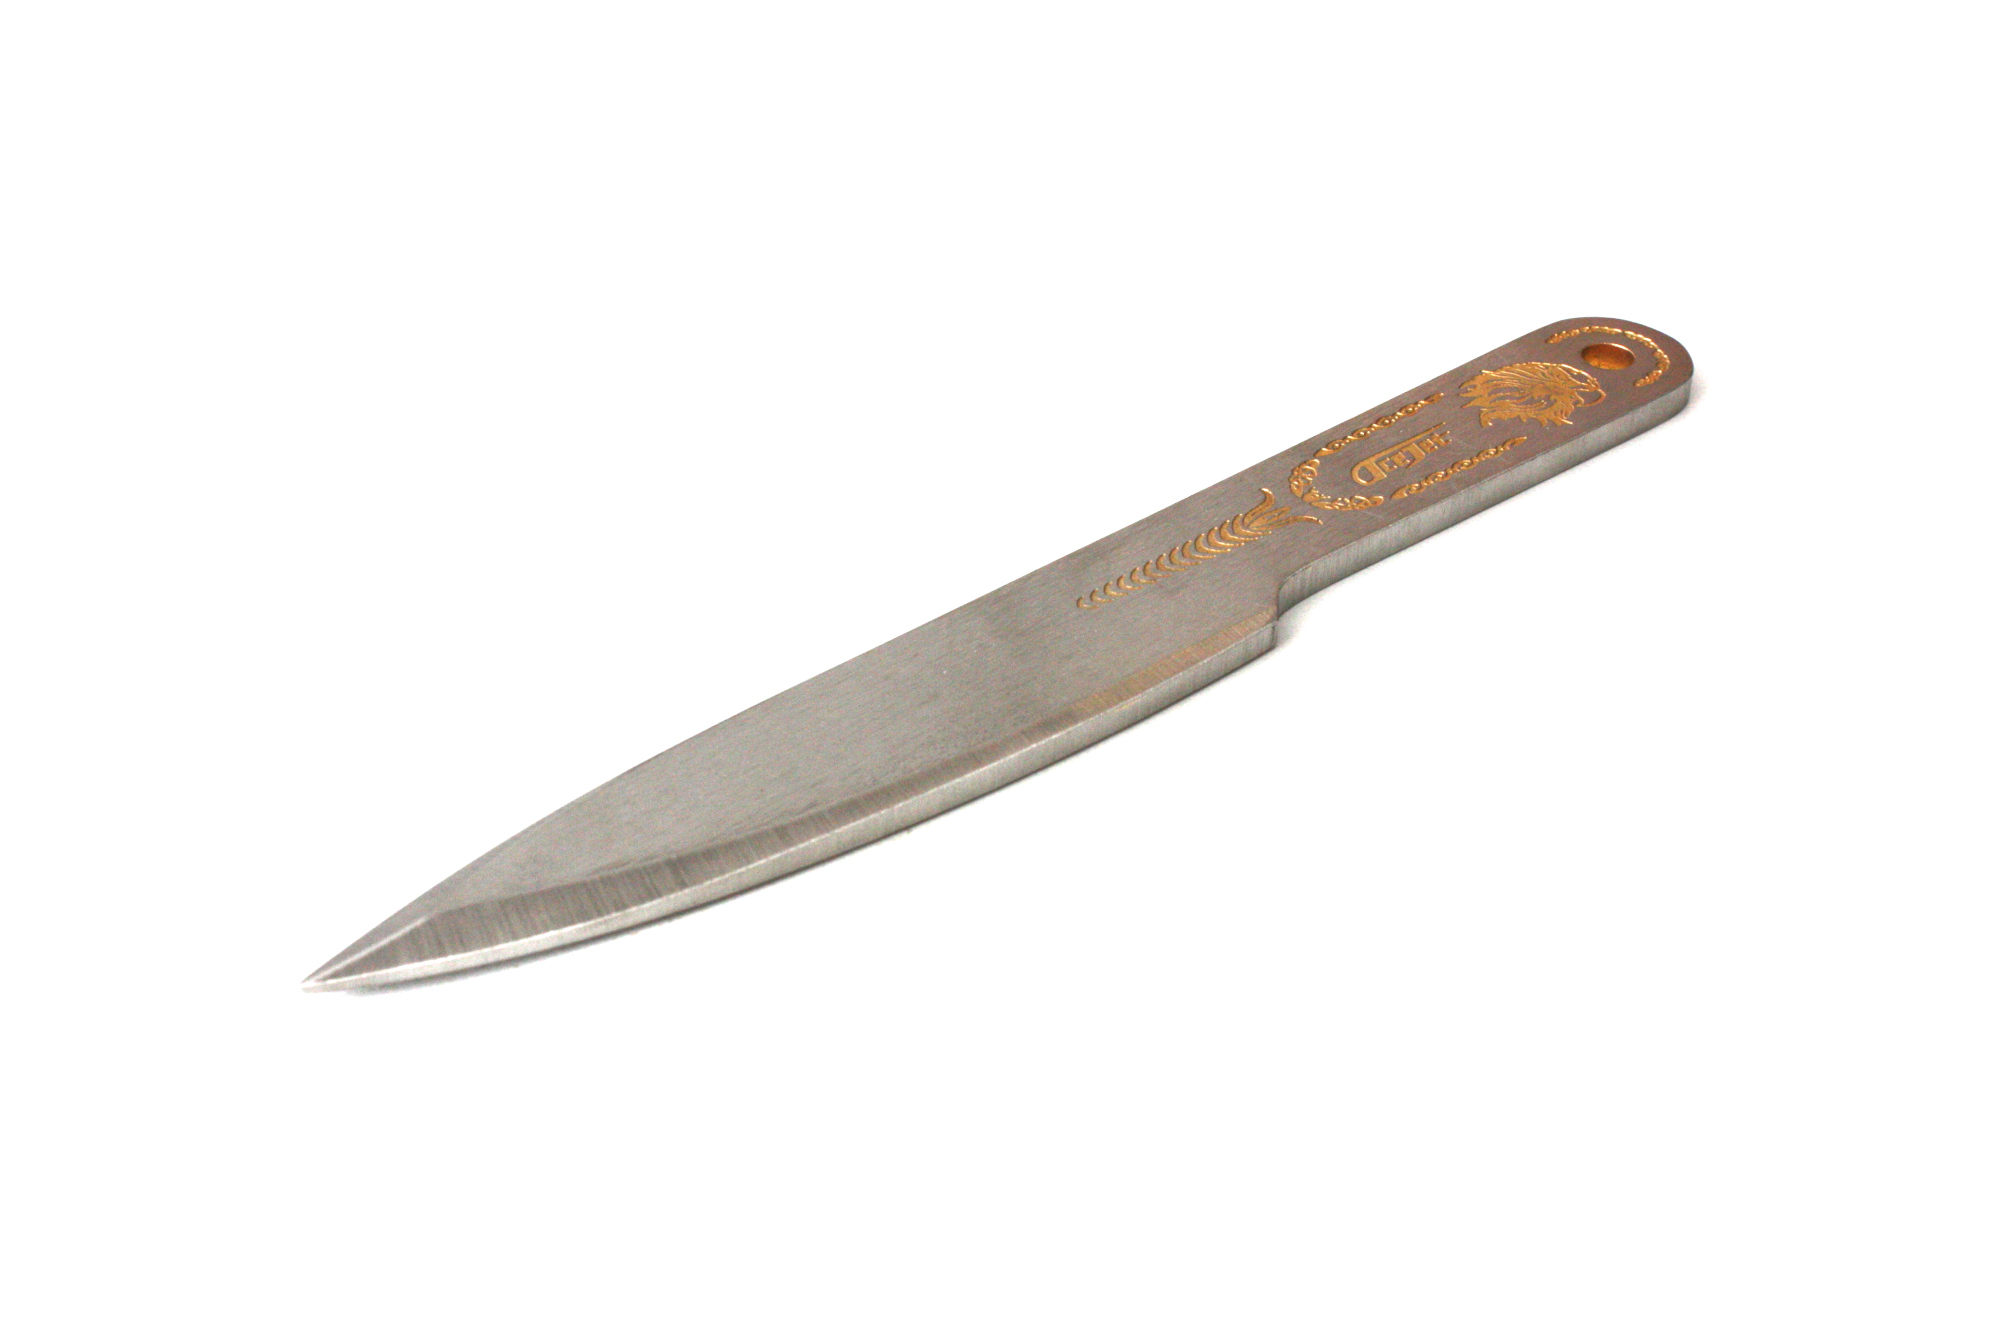 ACEJET APPACHE D2 Eagle in 24K GOLD - Throwing knife